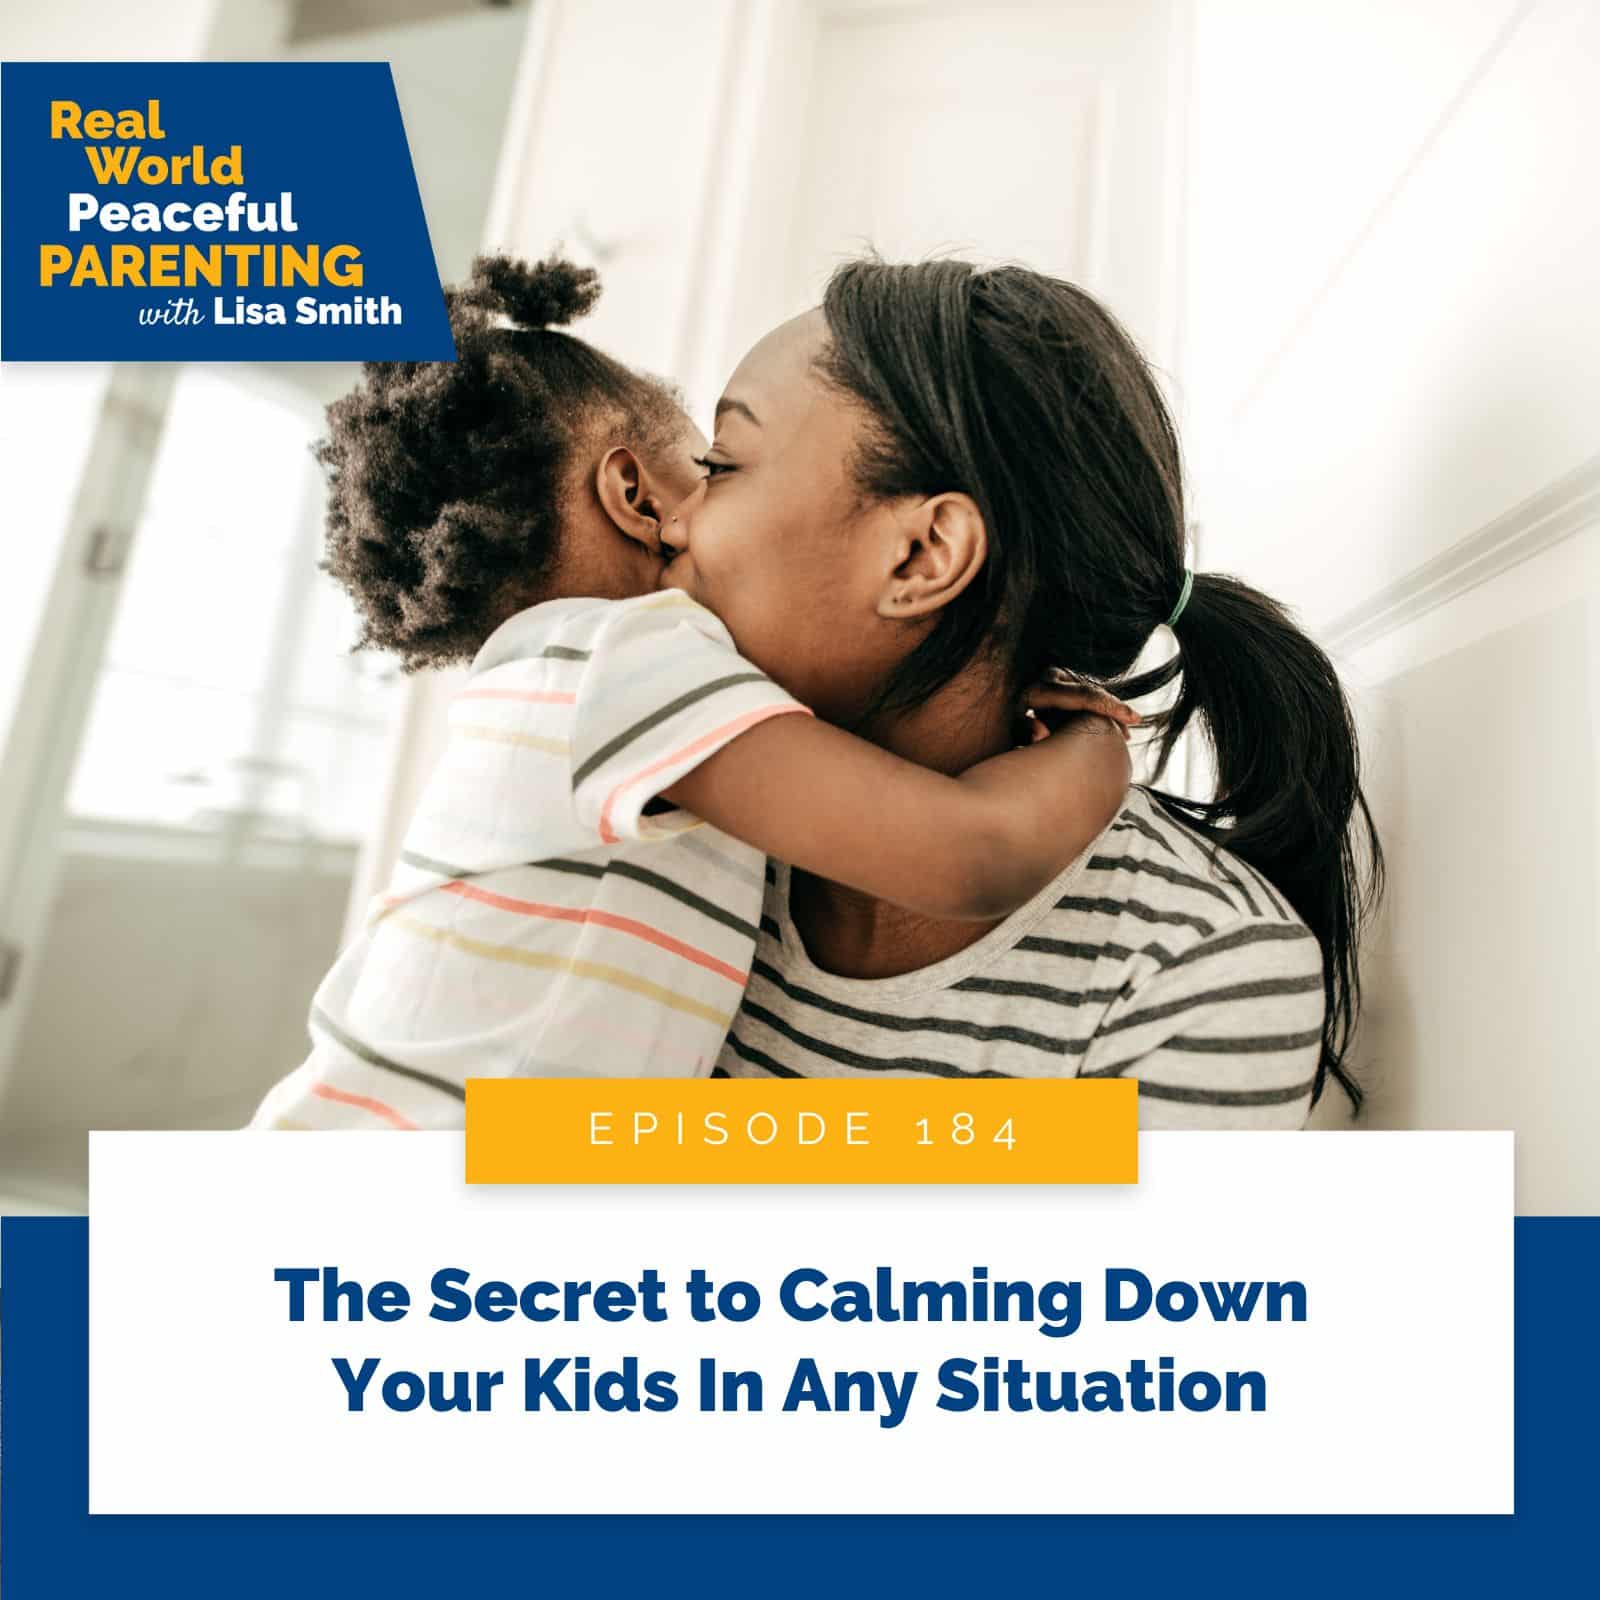 Real World Peaceful Parenting with Lisa Smith | The Secret to Calming Down Your Kids In Any Situation